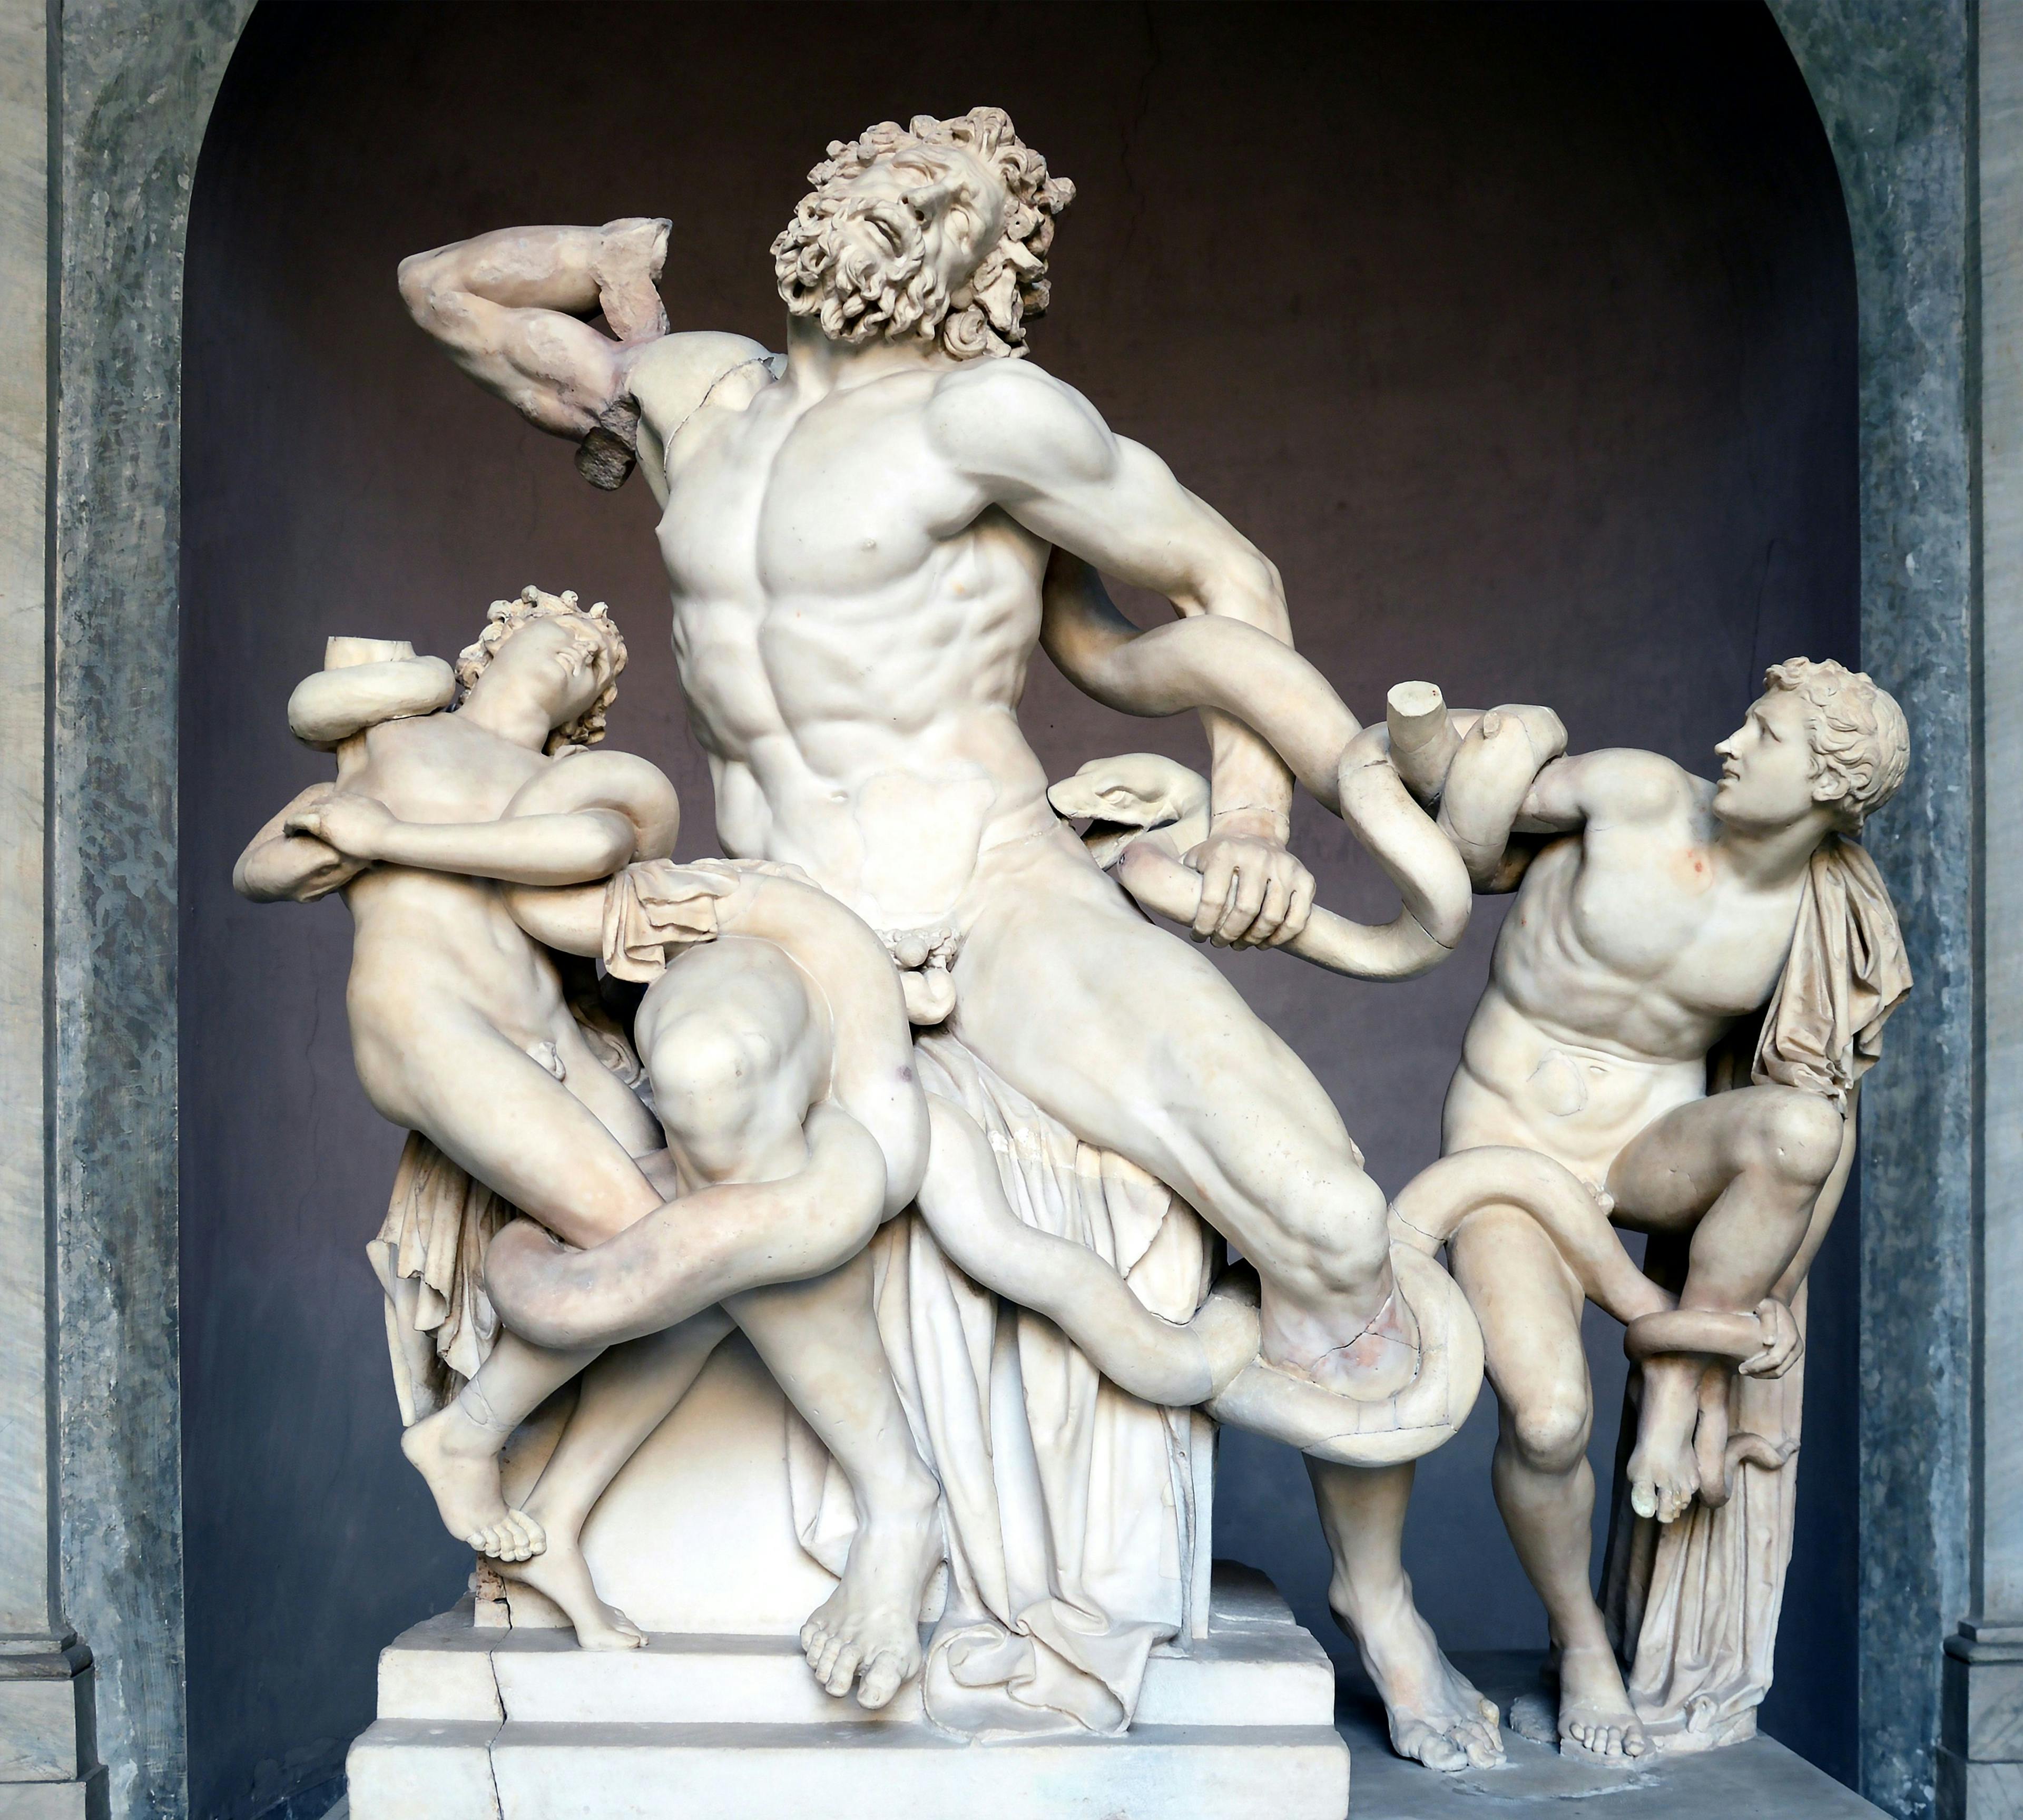 the marble sculpture The Laocoön Group